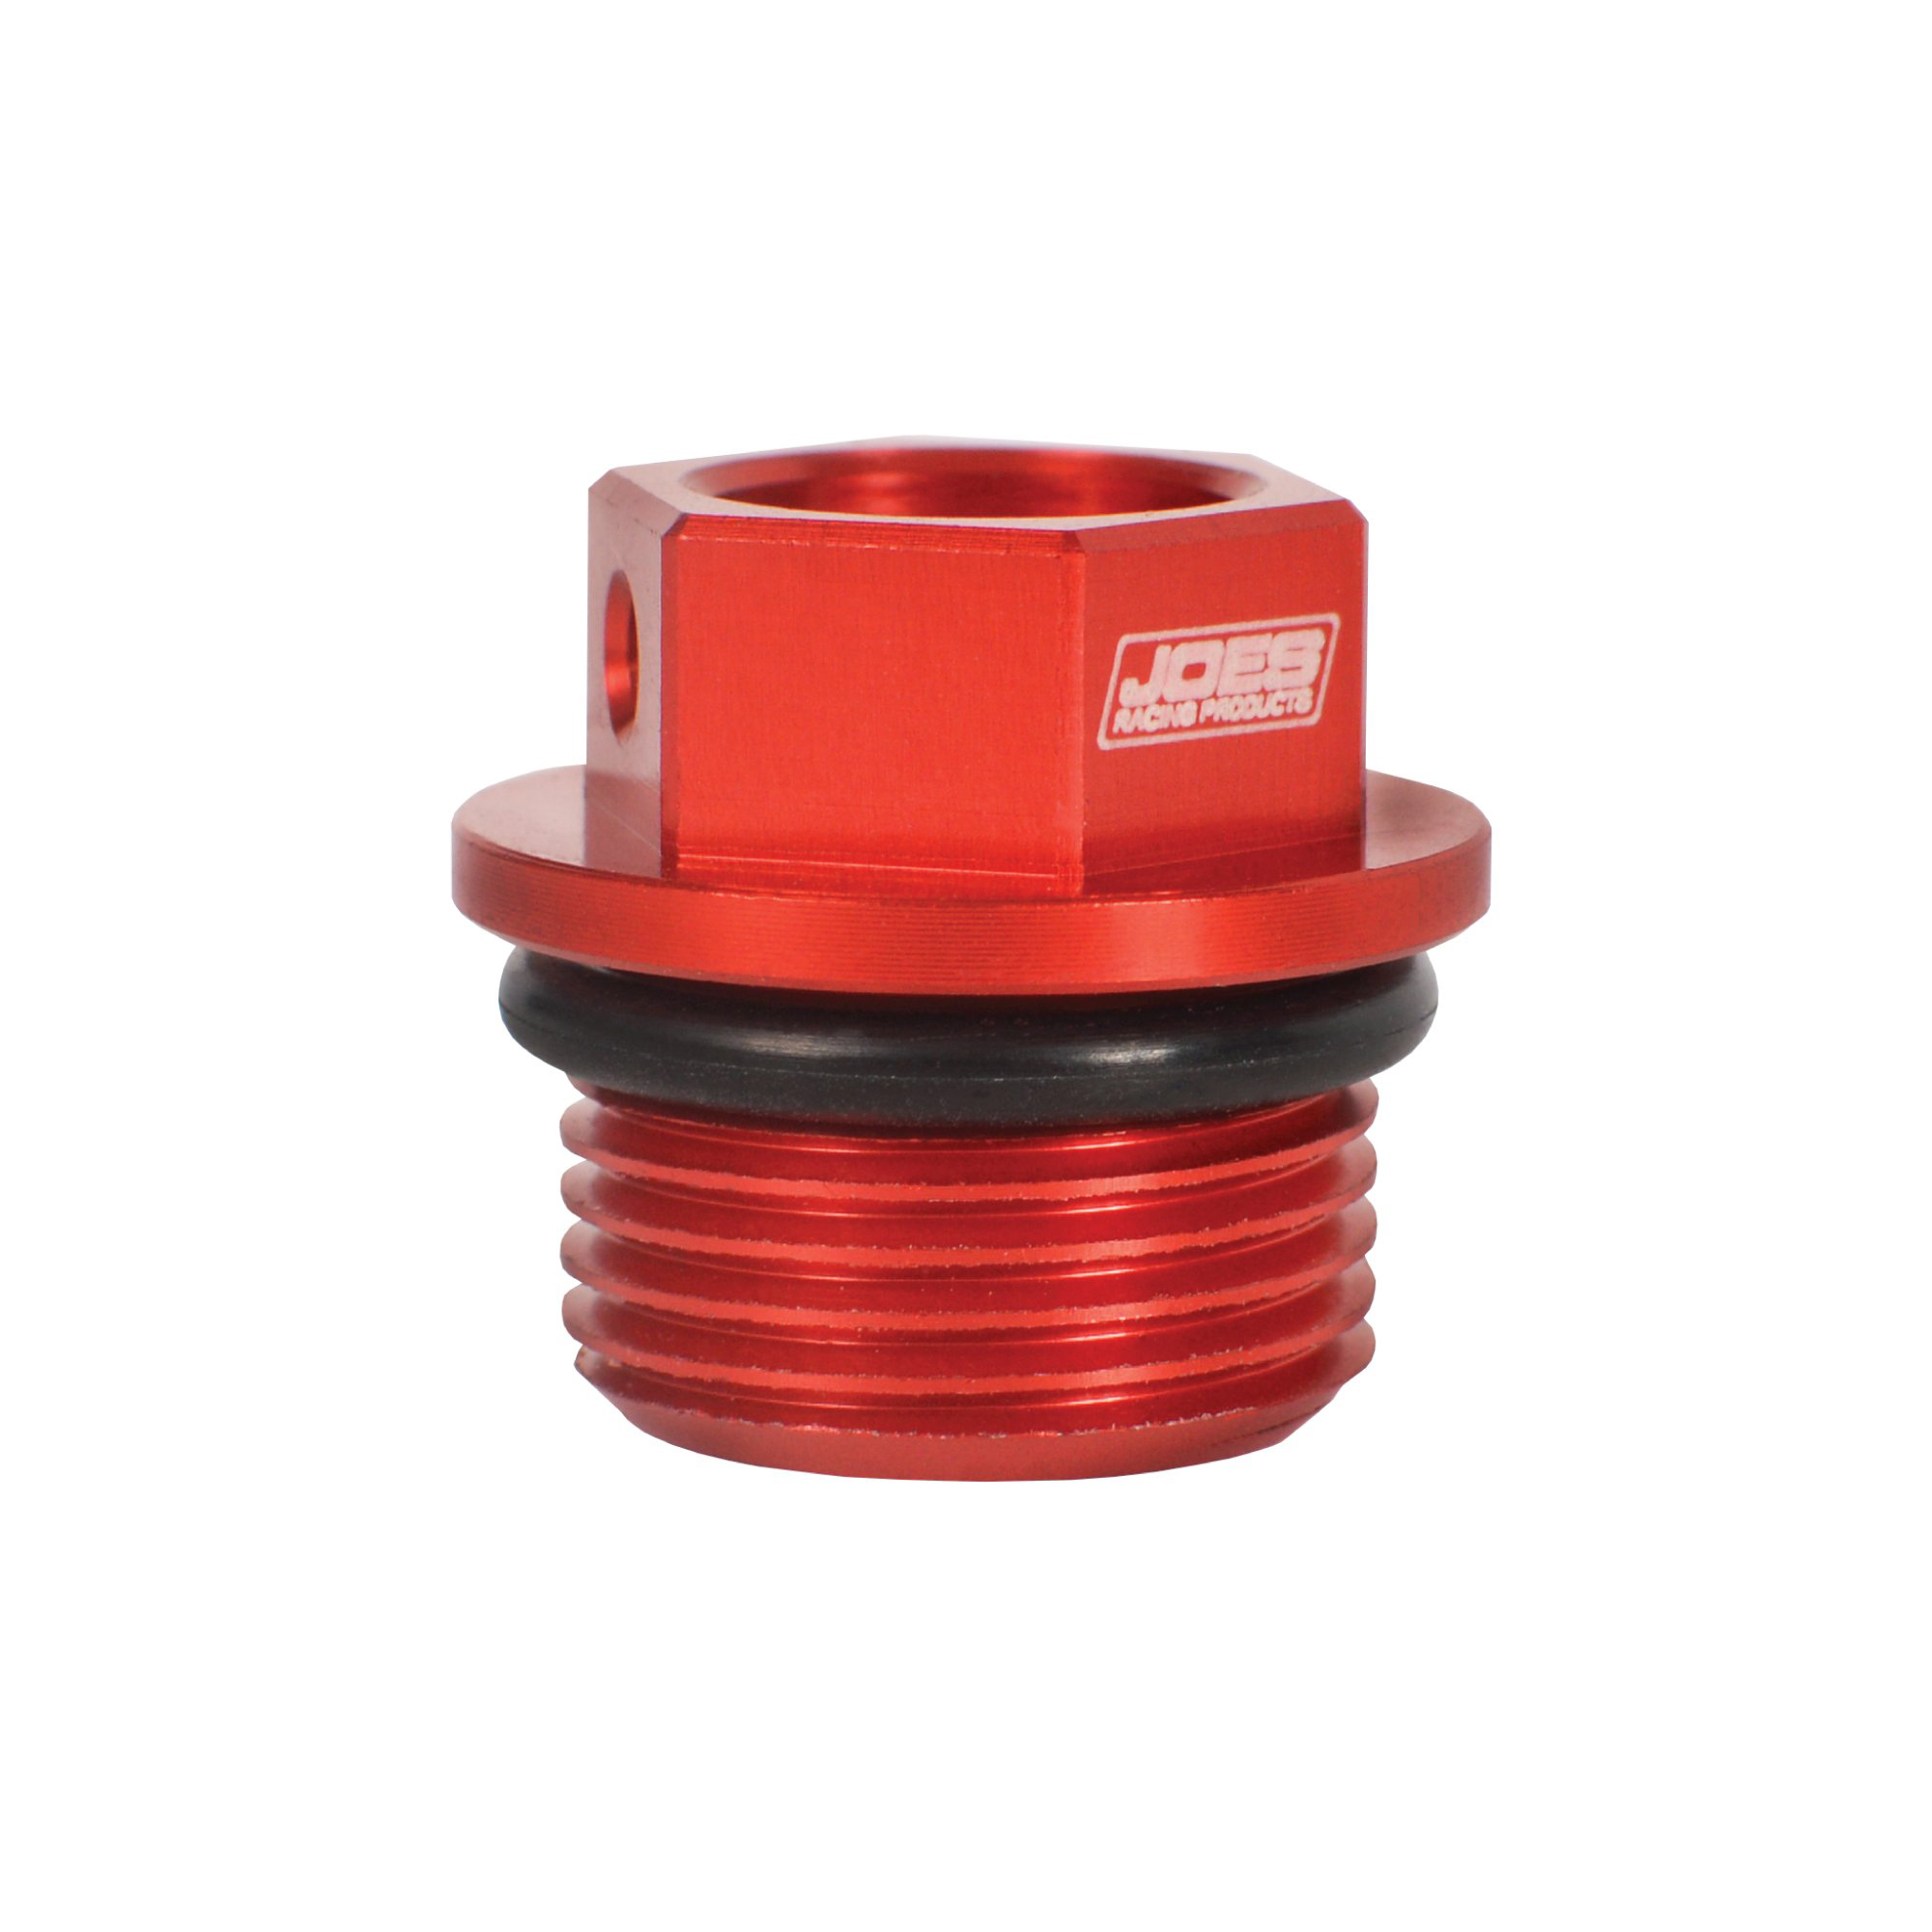 Joes Racing Products 25861 Oil Fill Plug, Screw-On, 20 mm x 1.5 Thread, 17 mm Hex Head, O-Ring Included, Aluminum, Red Anodized, Suzuki GSXR Micro Sprint, Each